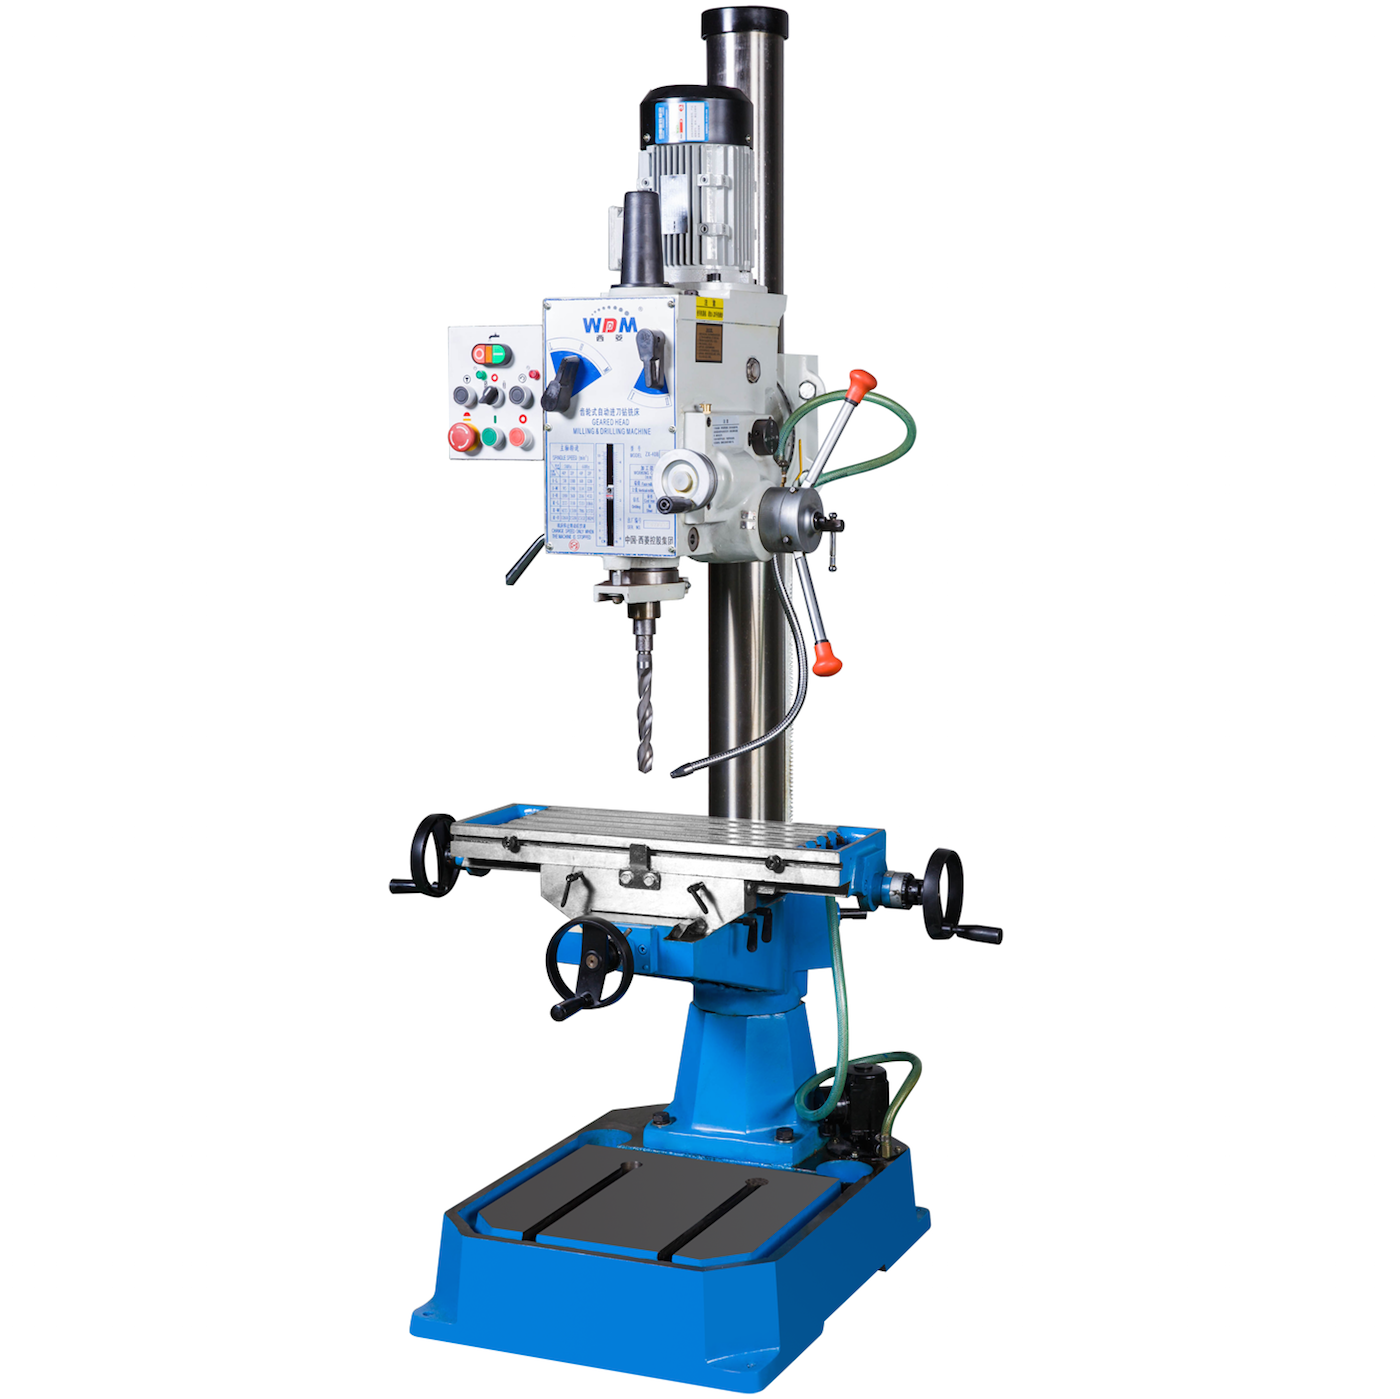 Xest Ling Drilling & Milling Machine 40mm,750W, ZX-40BPC - Click Image to Close